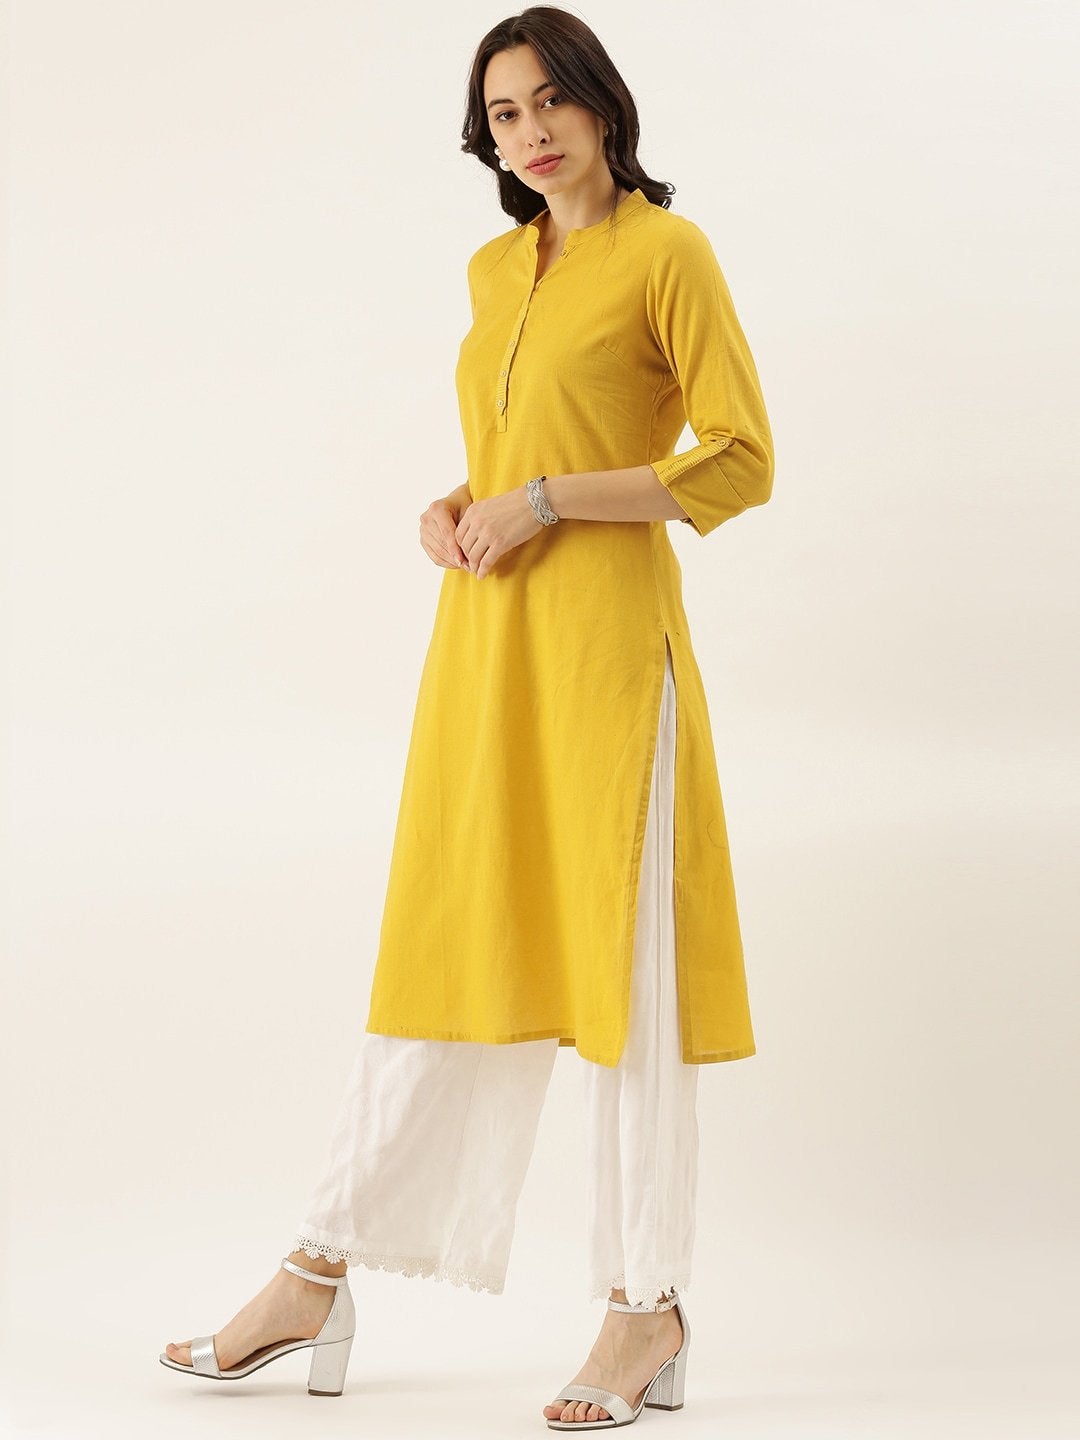 Women's The Dressify Yellow Solid Straight Roll up Sleeve Kurti - Divena